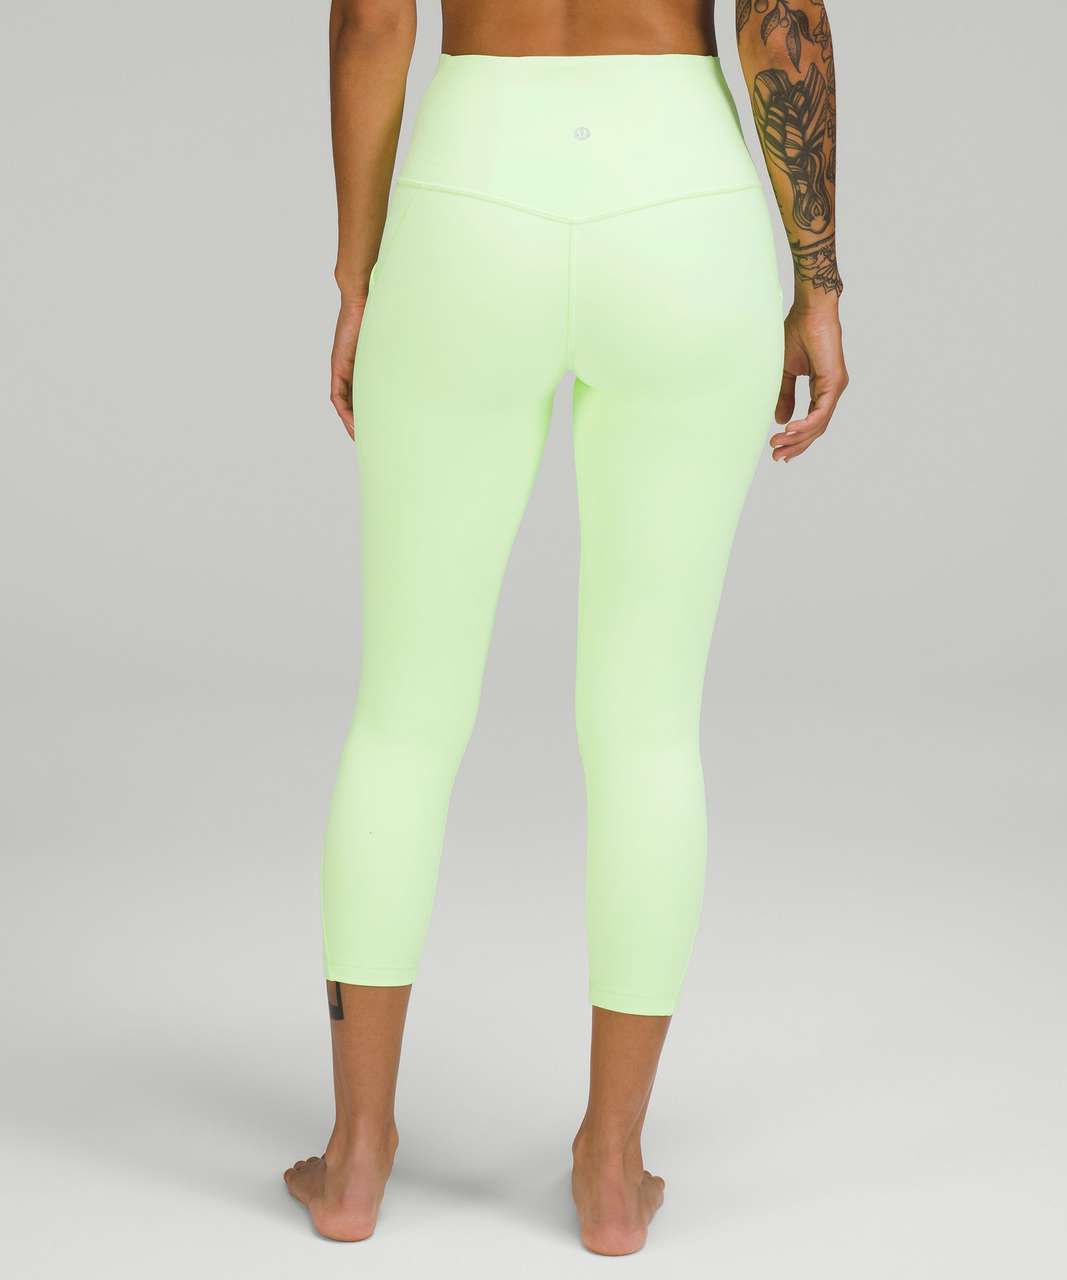 Lululemon Align High-Rise Crop with Pockets 23" - Faded Zap